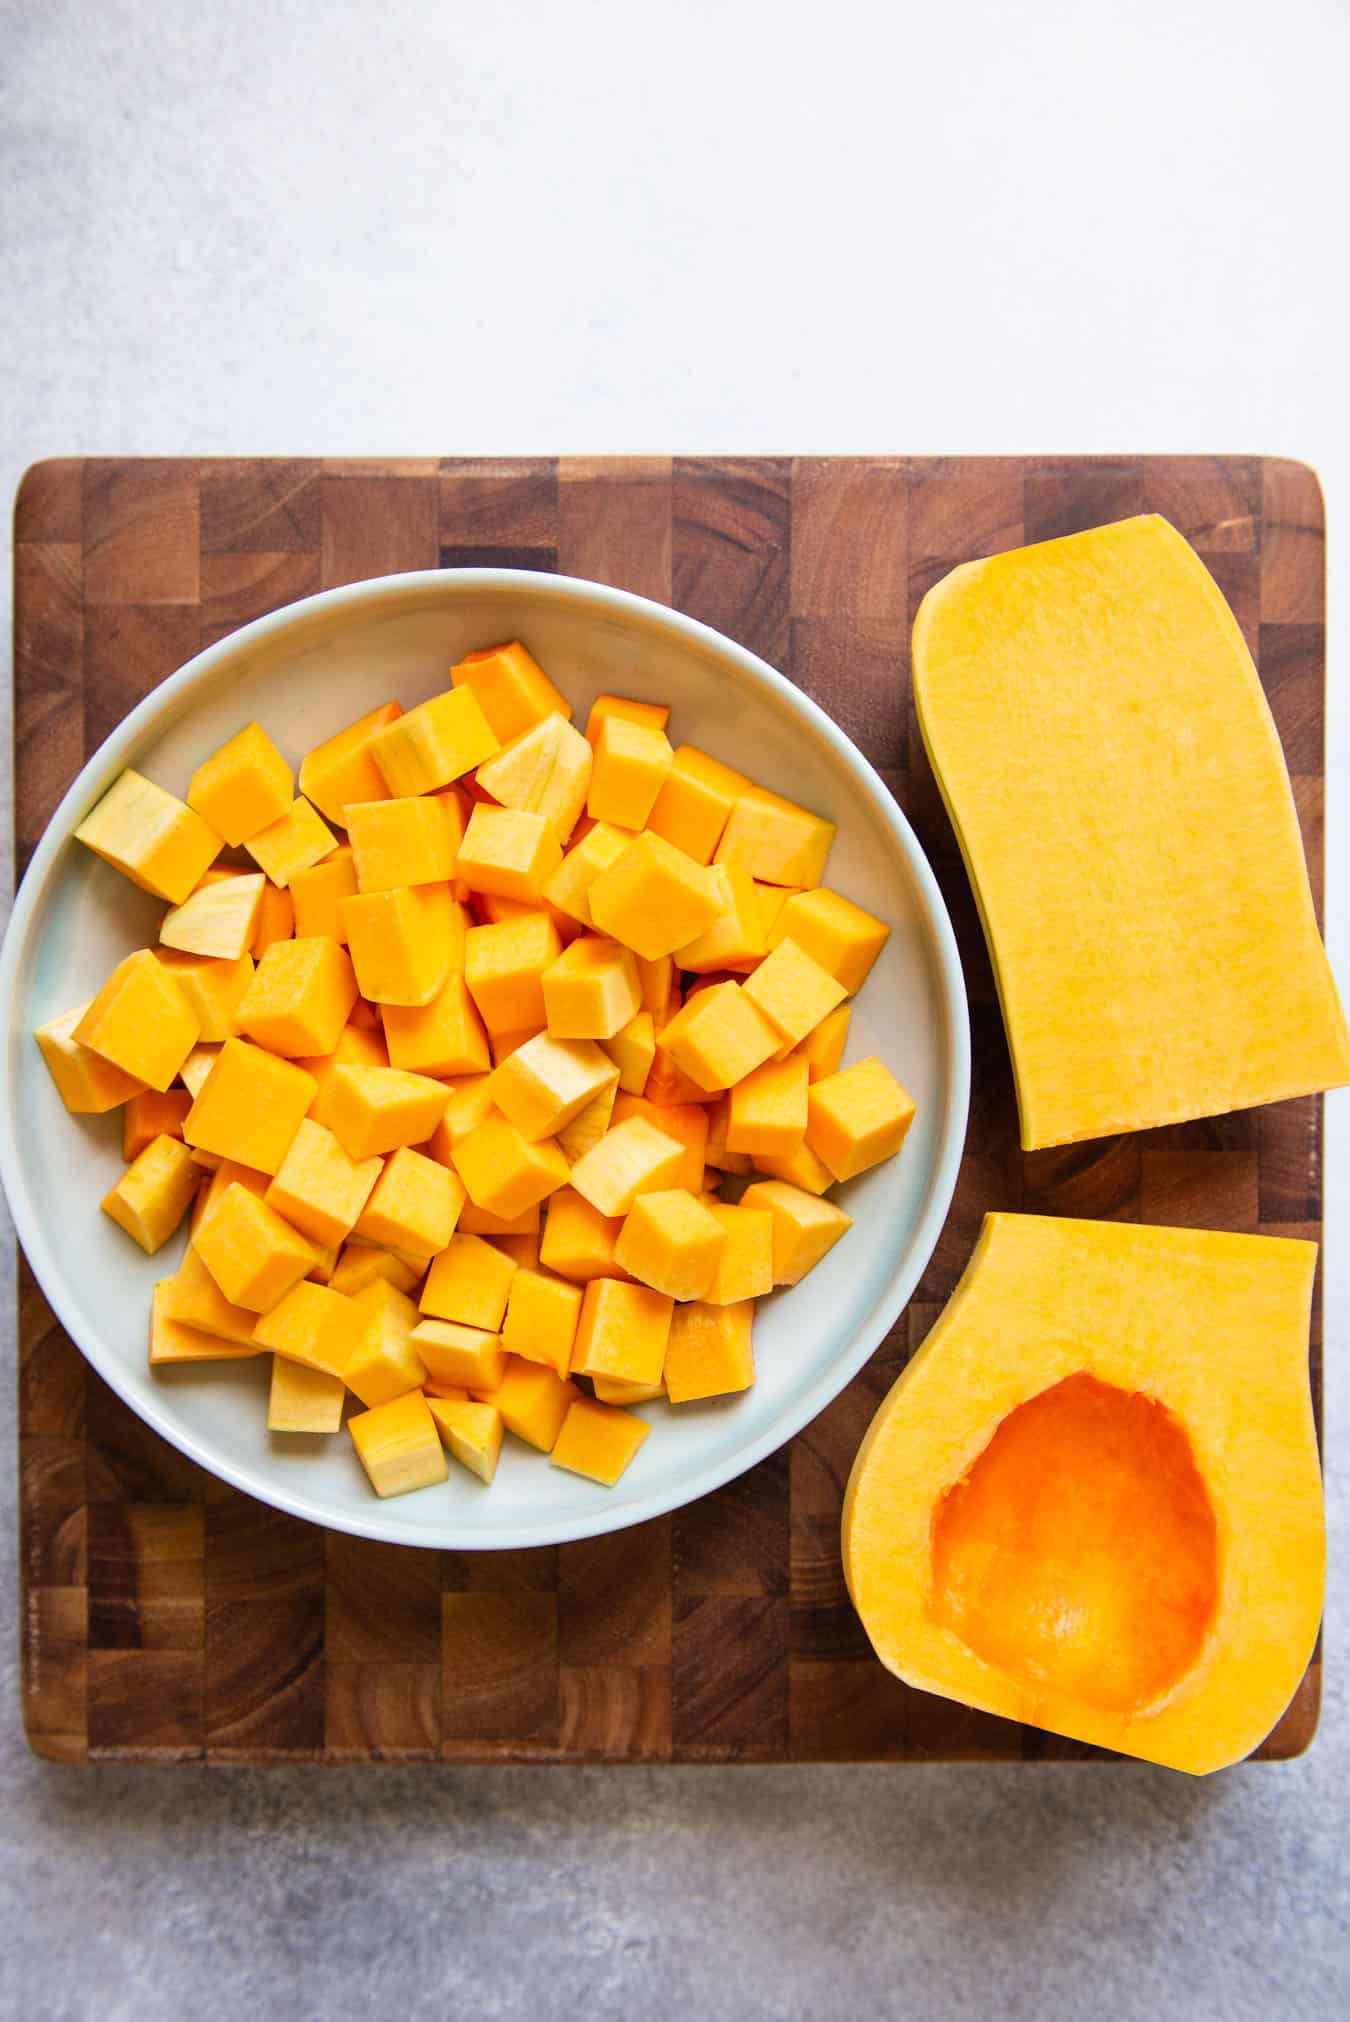 How to Cut Butternut Squash - a step-by-step guide with video